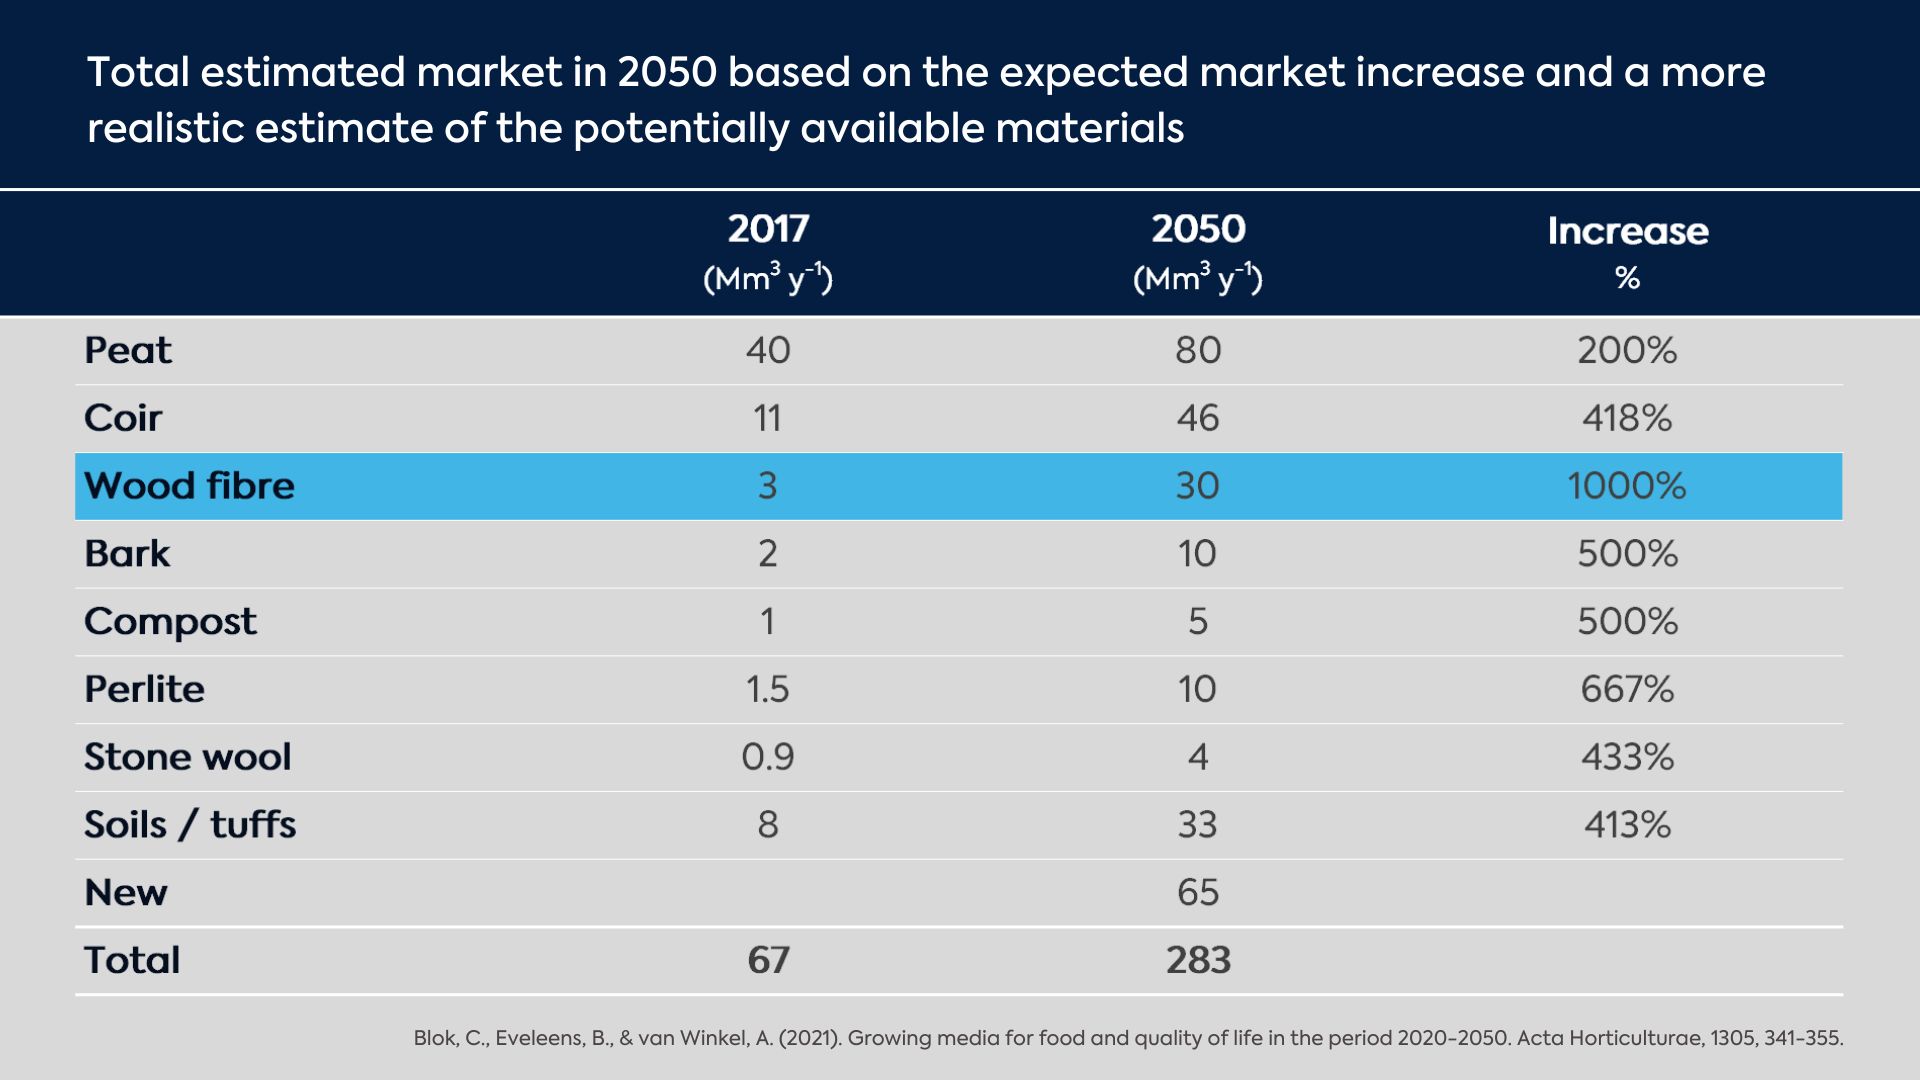 Table detailing the total estimated market in 2050 for growing media based on the expected market increase and a more realistic estimate of the potentially available materials